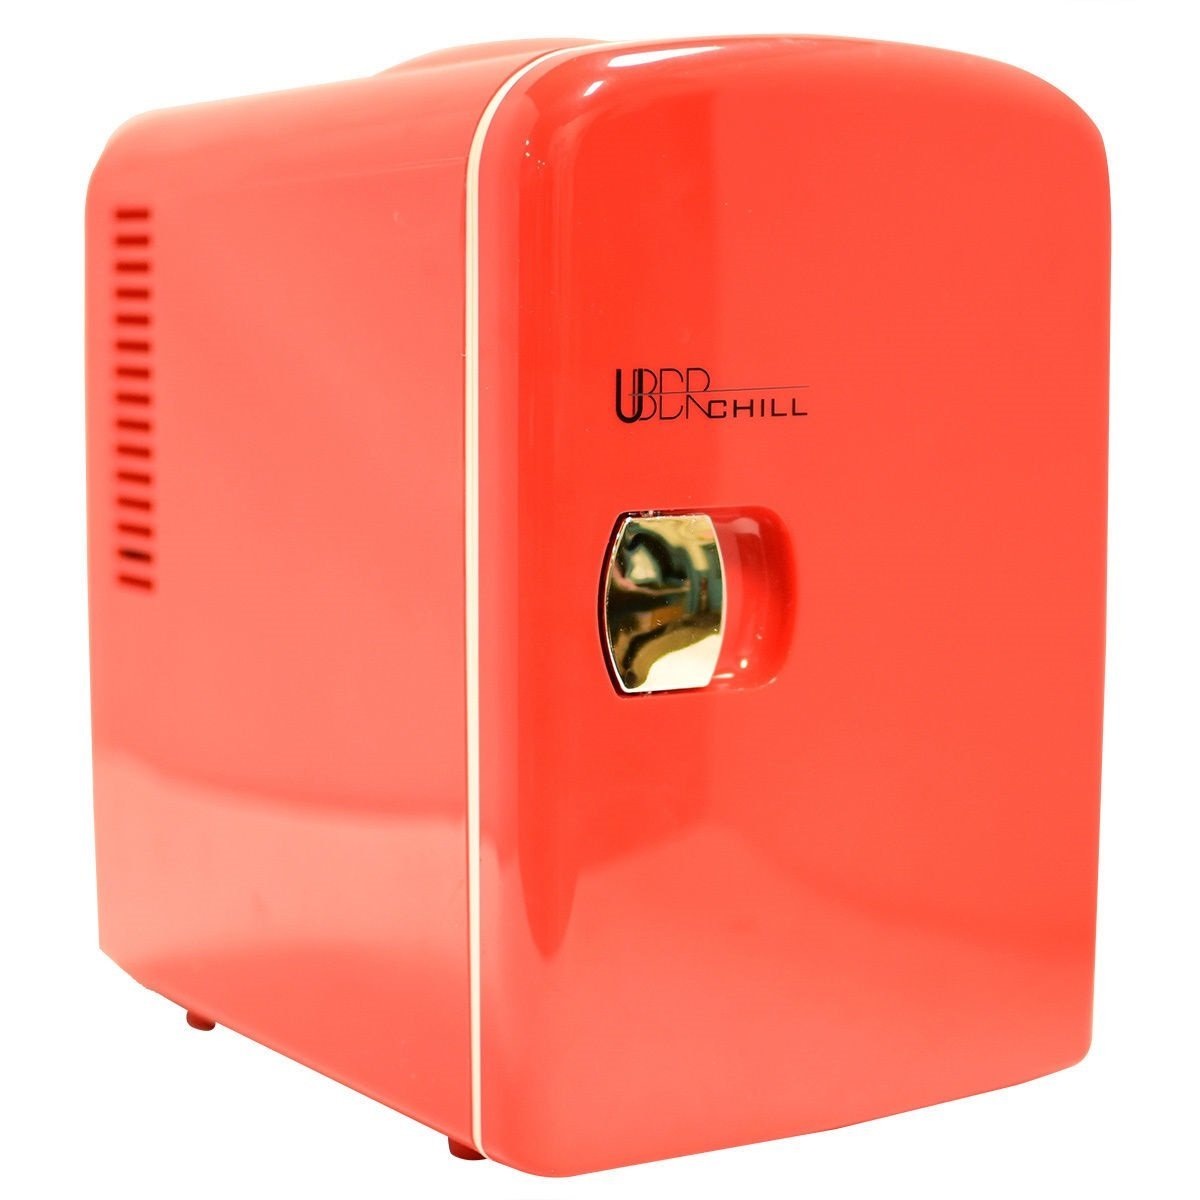 Ub-ch1-red Chill 6 Can Retro Personal Mini Fridge For Bedroom, Office Or Dorm - Red